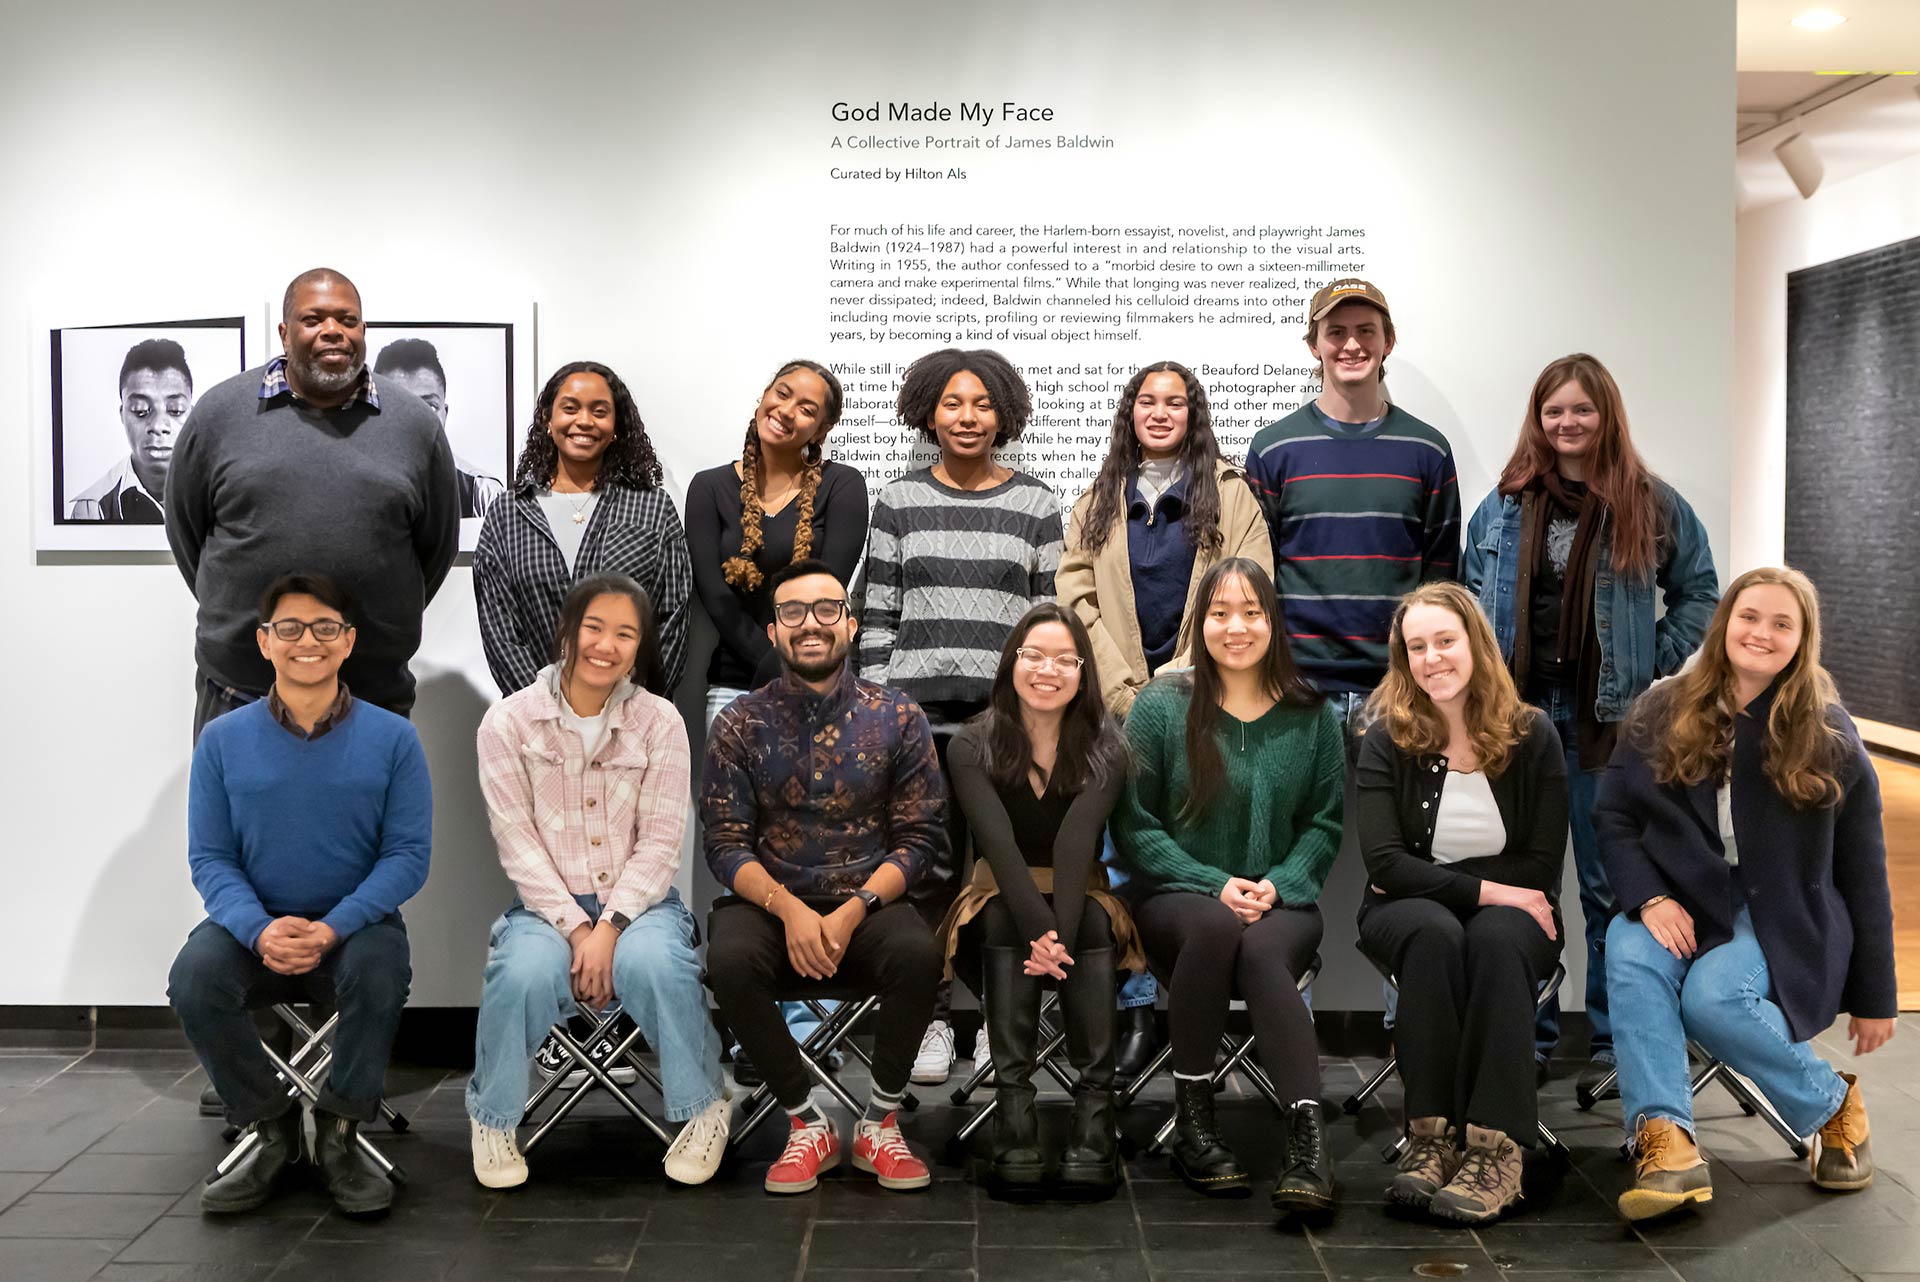 Hilton Als poses with the students who took his Master Class in writing.